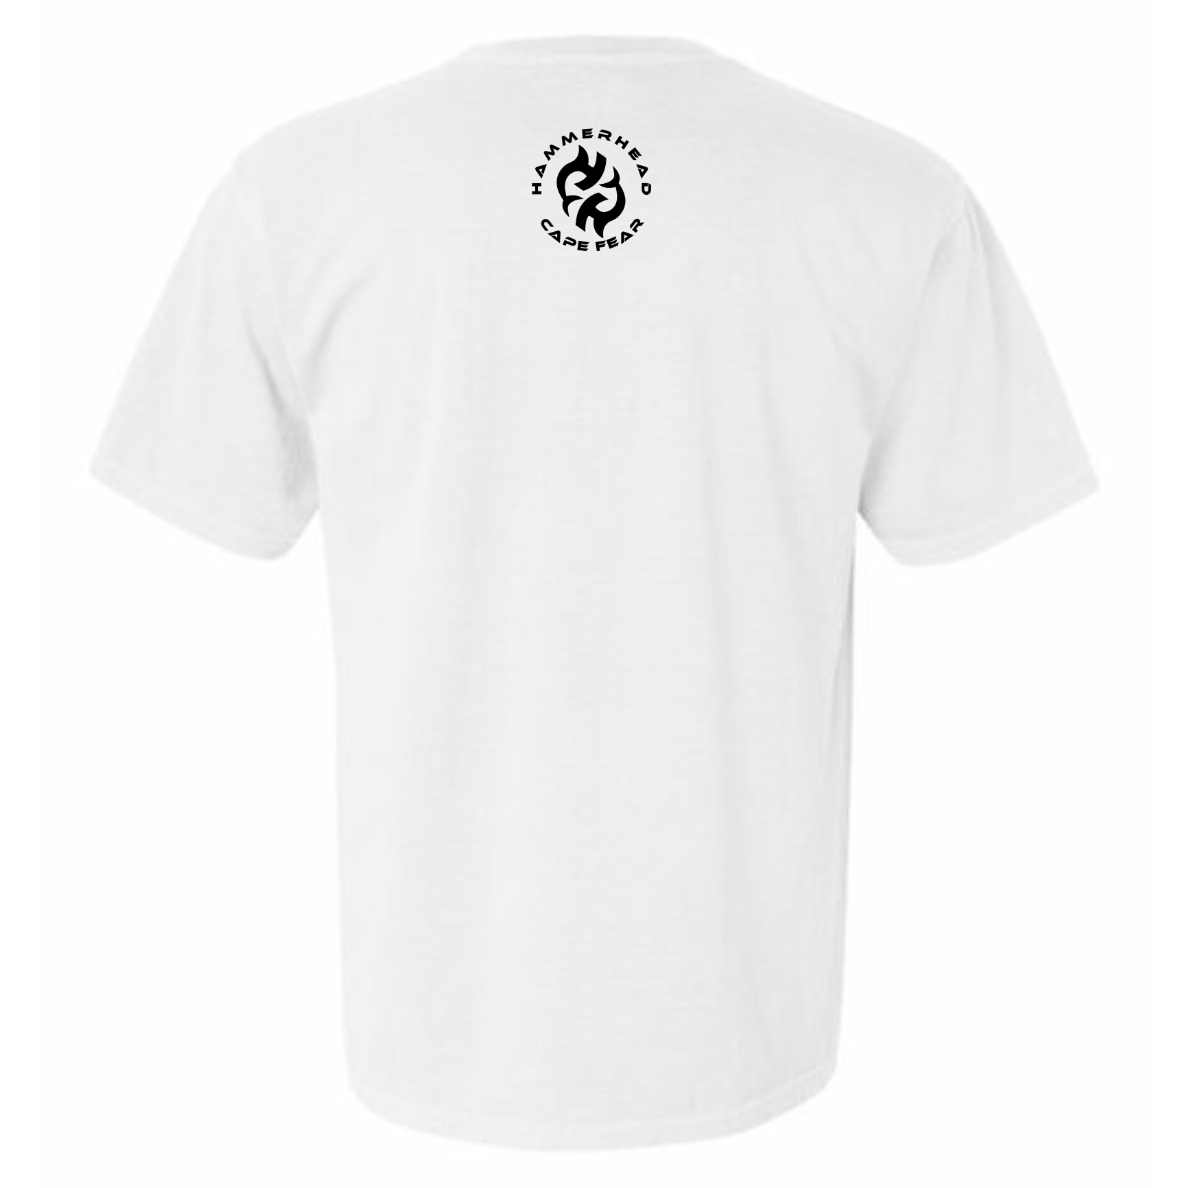 Hammer T-Shirt White, Relaxed Fit